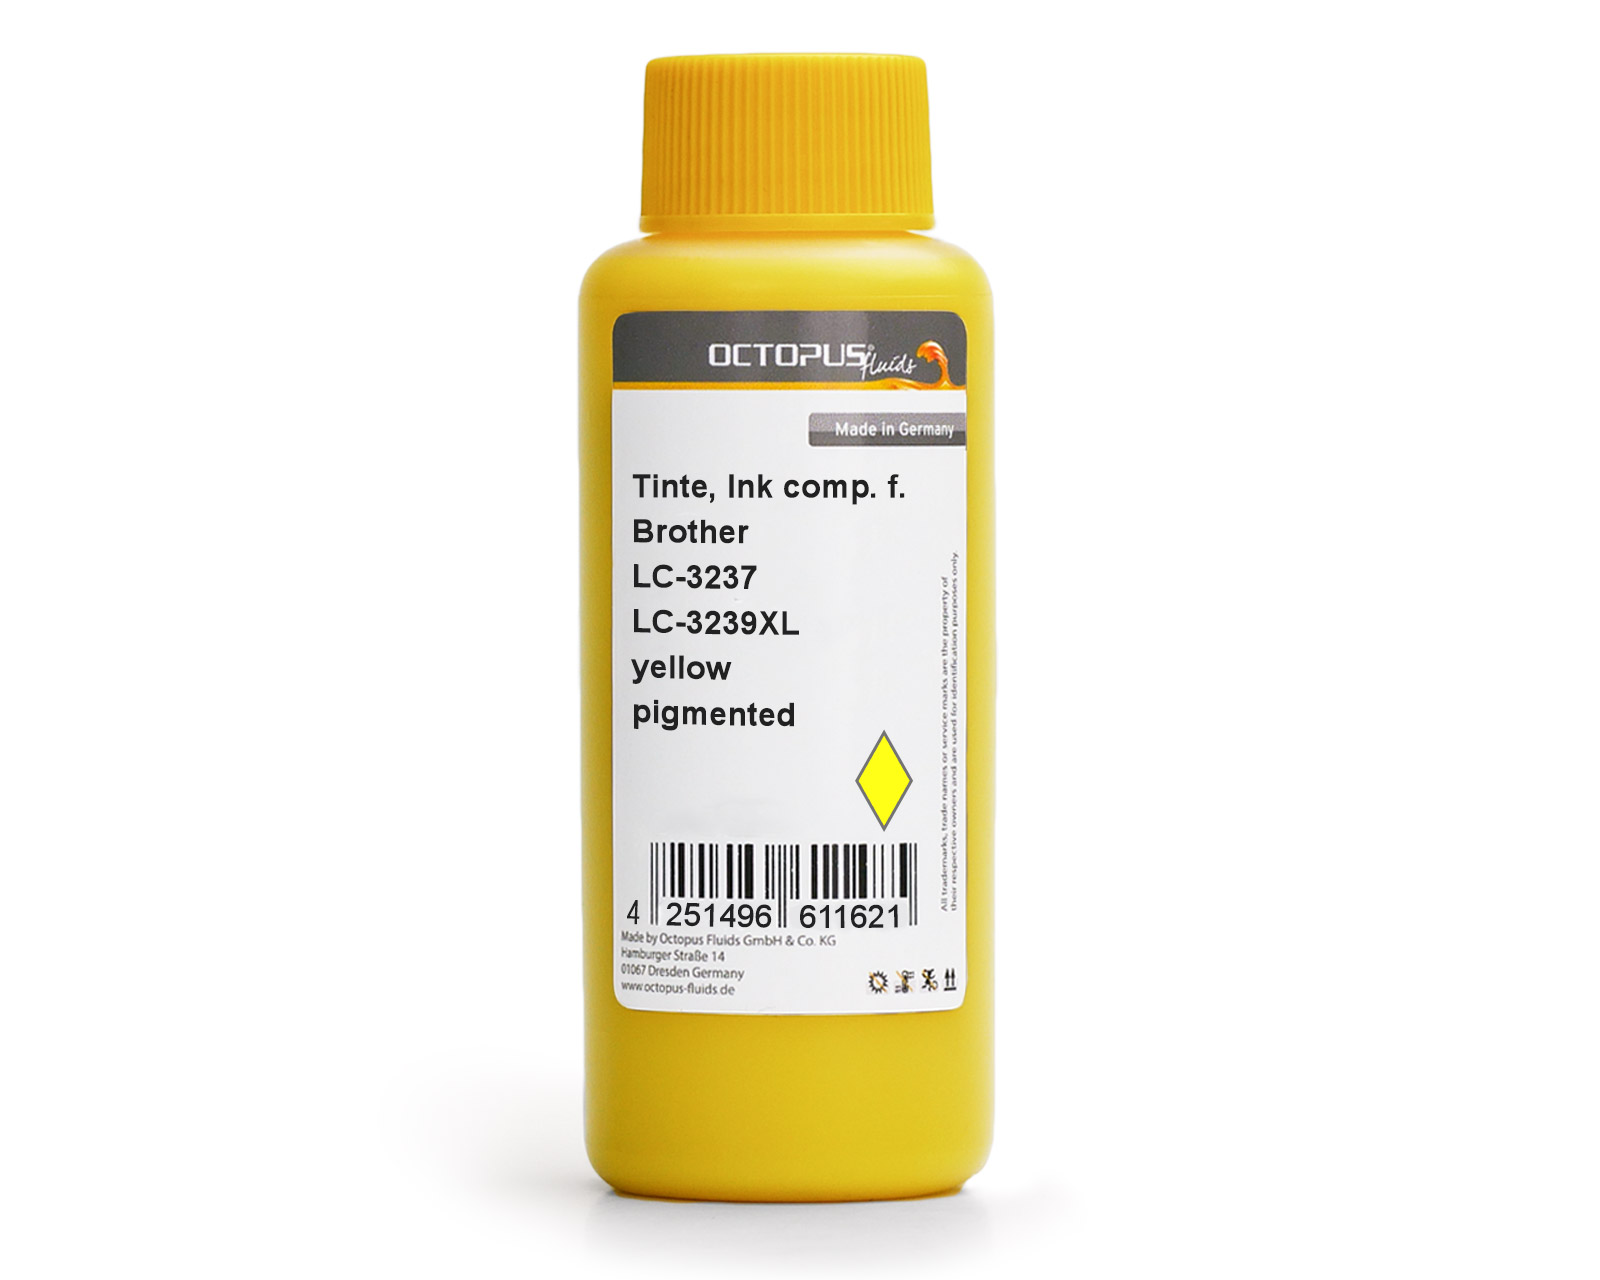 Refill ink Brother LC-3237 Y, LC-3239 Y, Brother HL-J 6000, 6100, MFC-J 5945, 6945, 6947 yellow